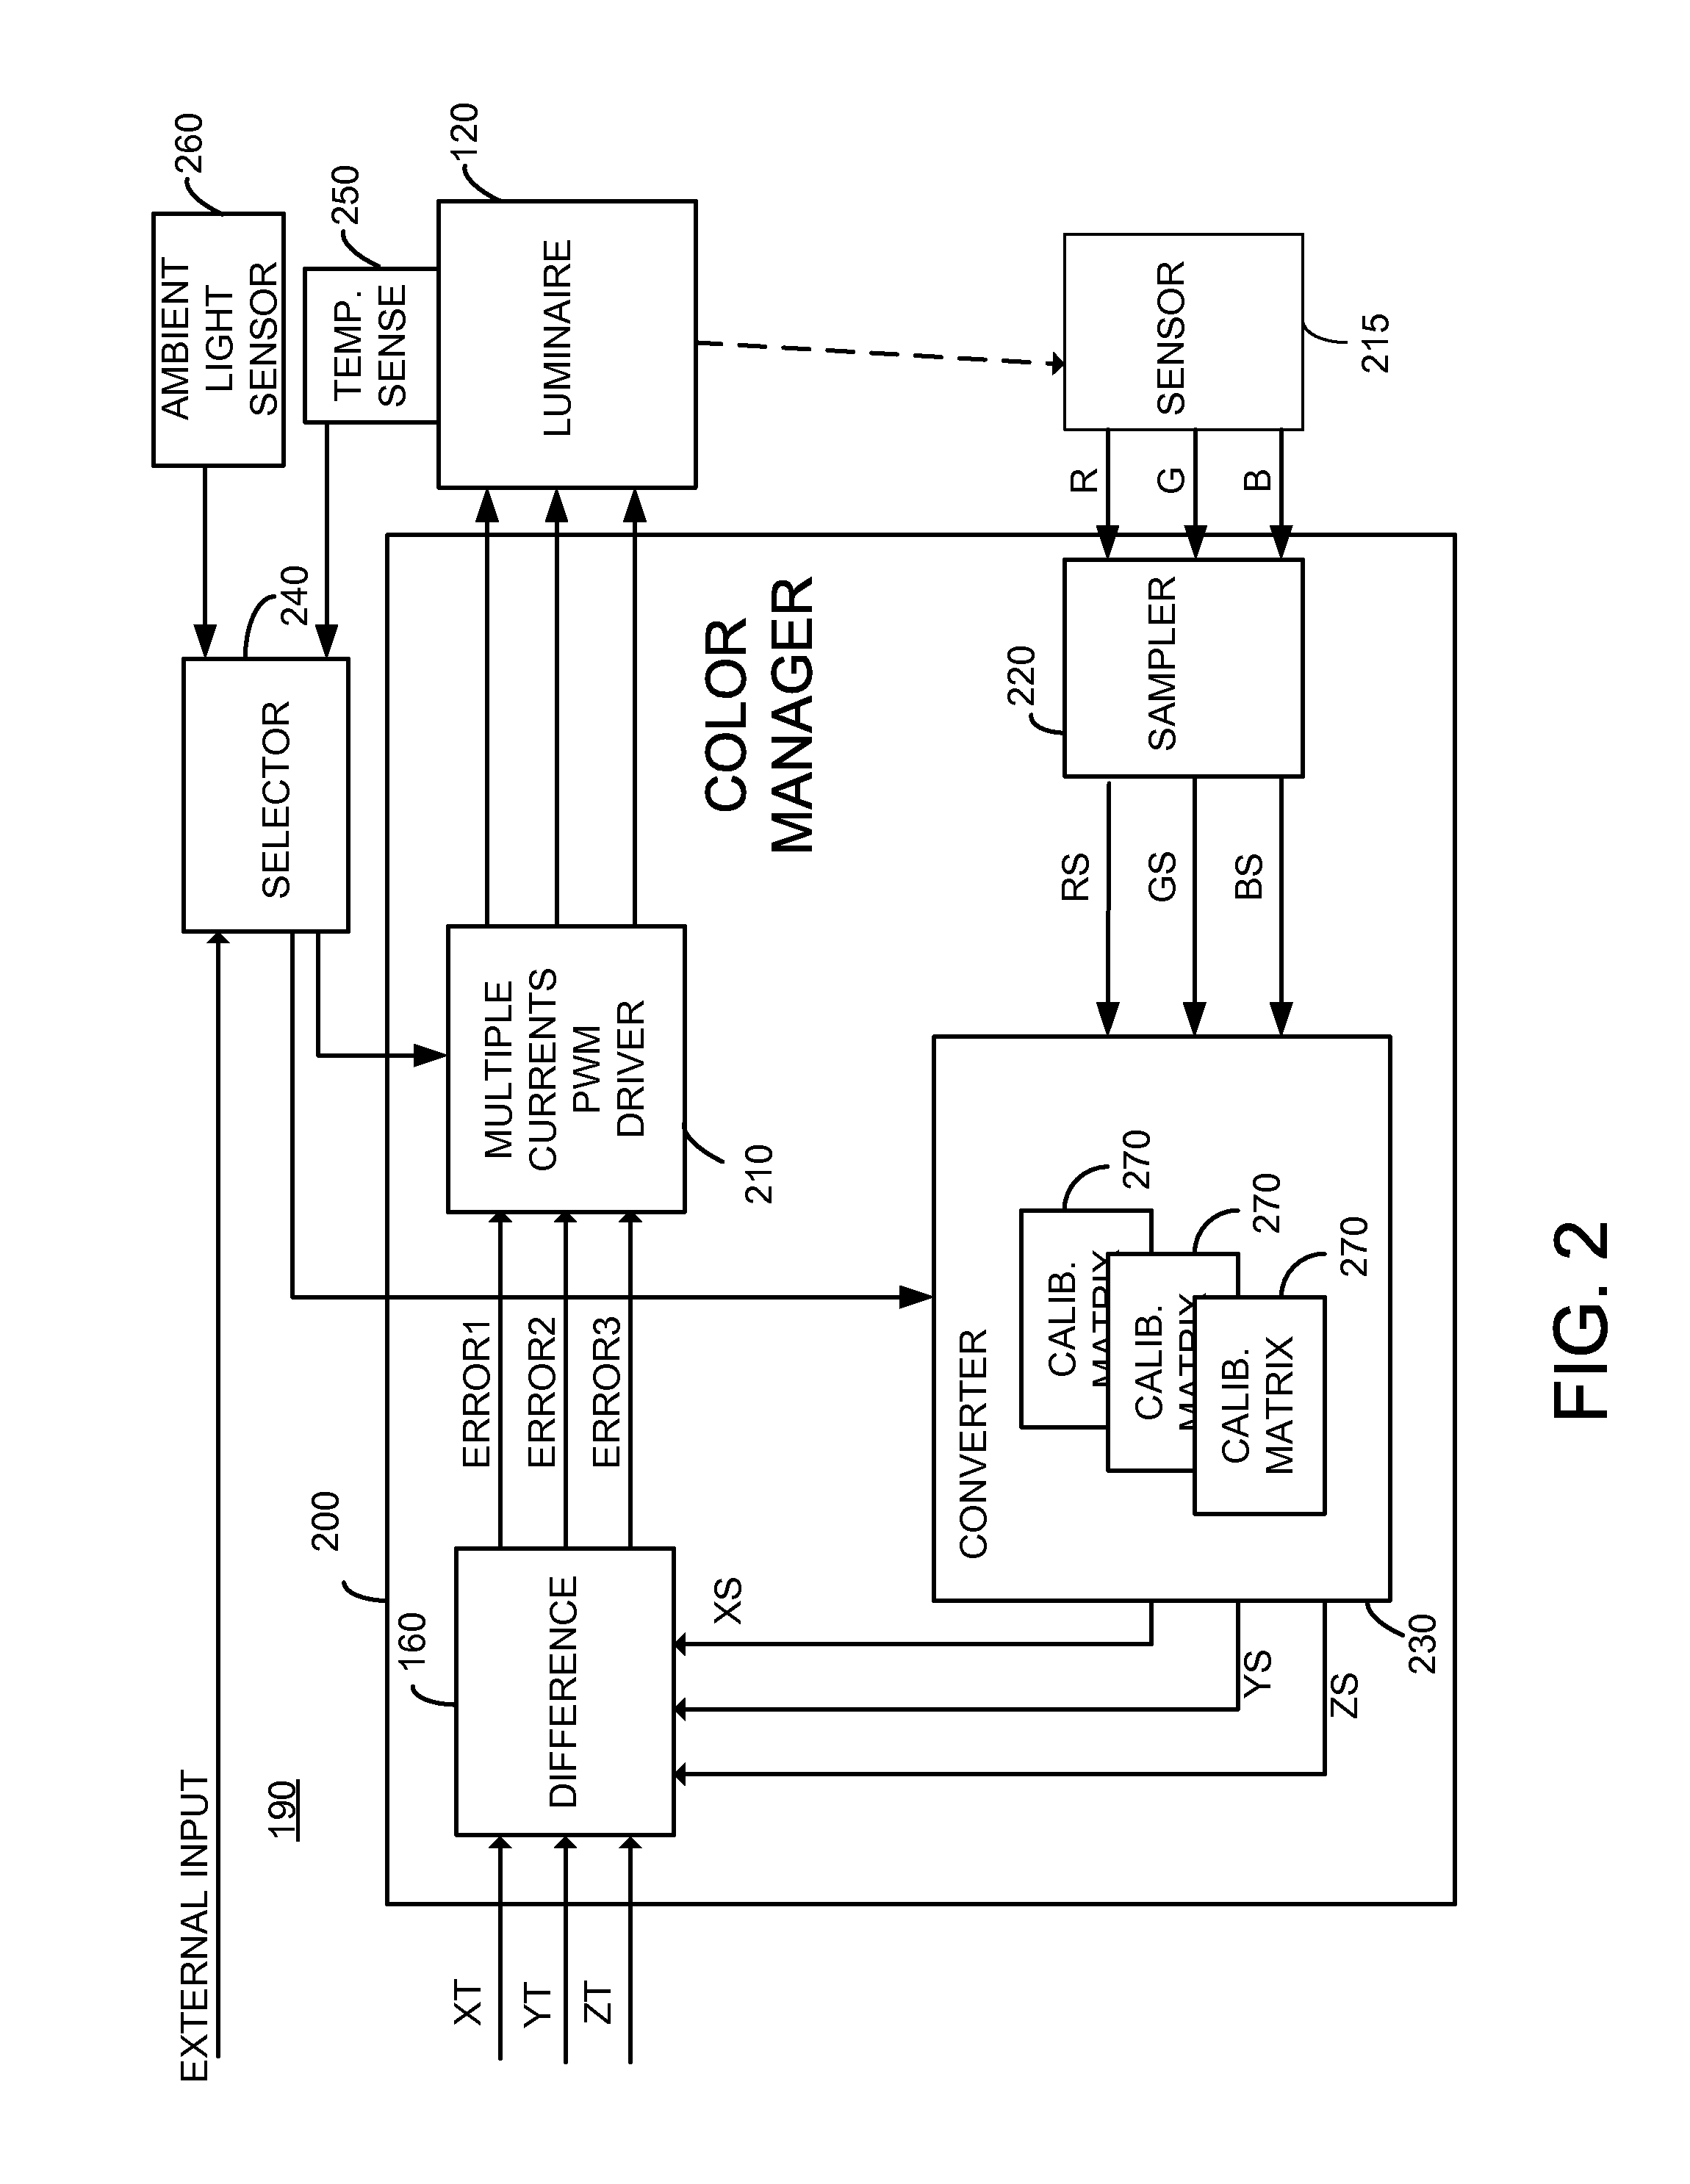 Color manager for backlight systems operative at multiple current levels